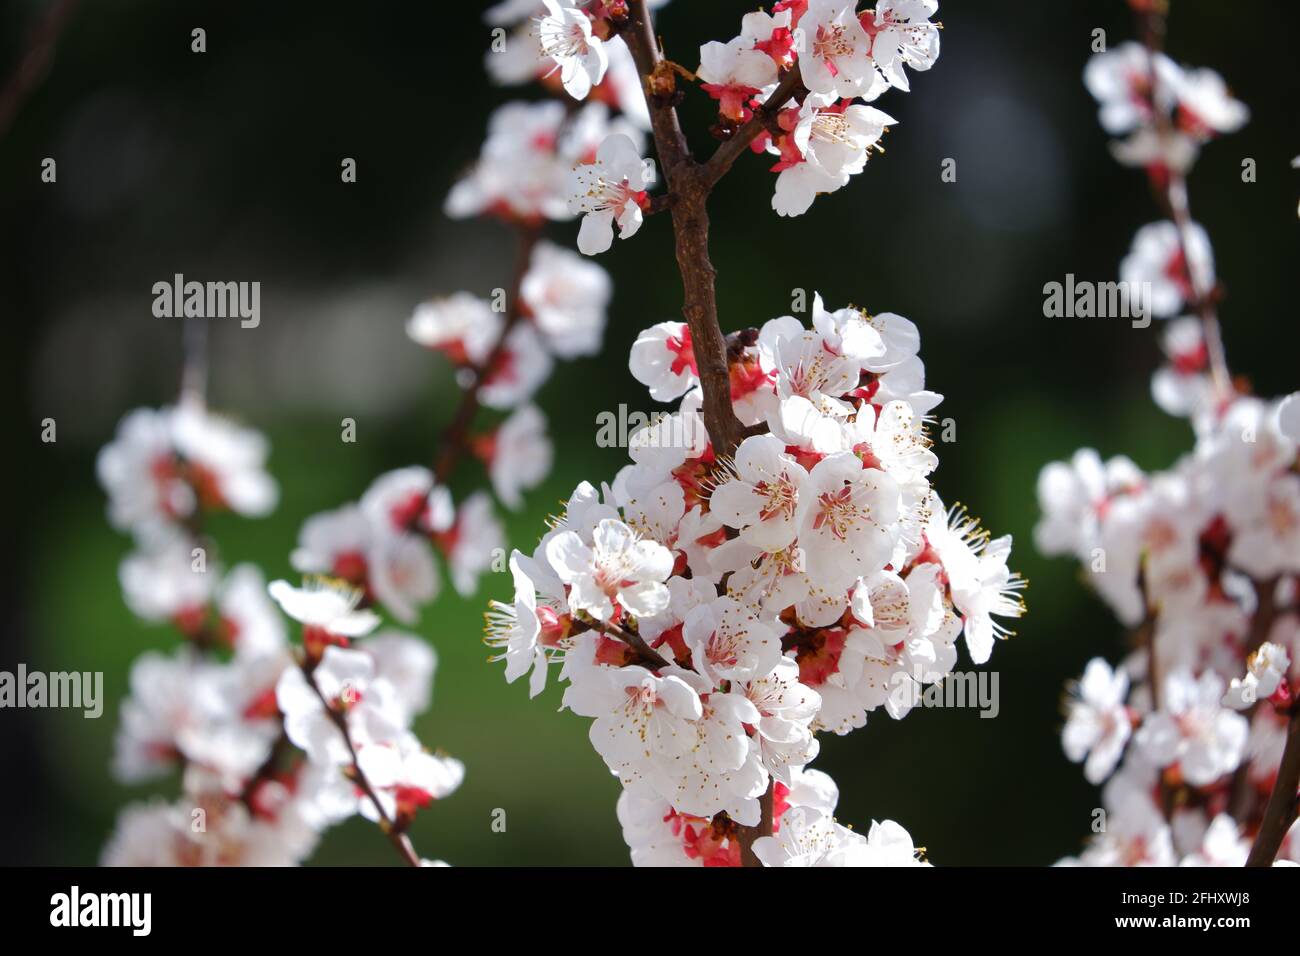 Red and White Beautiful Apricot Flowers on tree bookeh Stock Photo